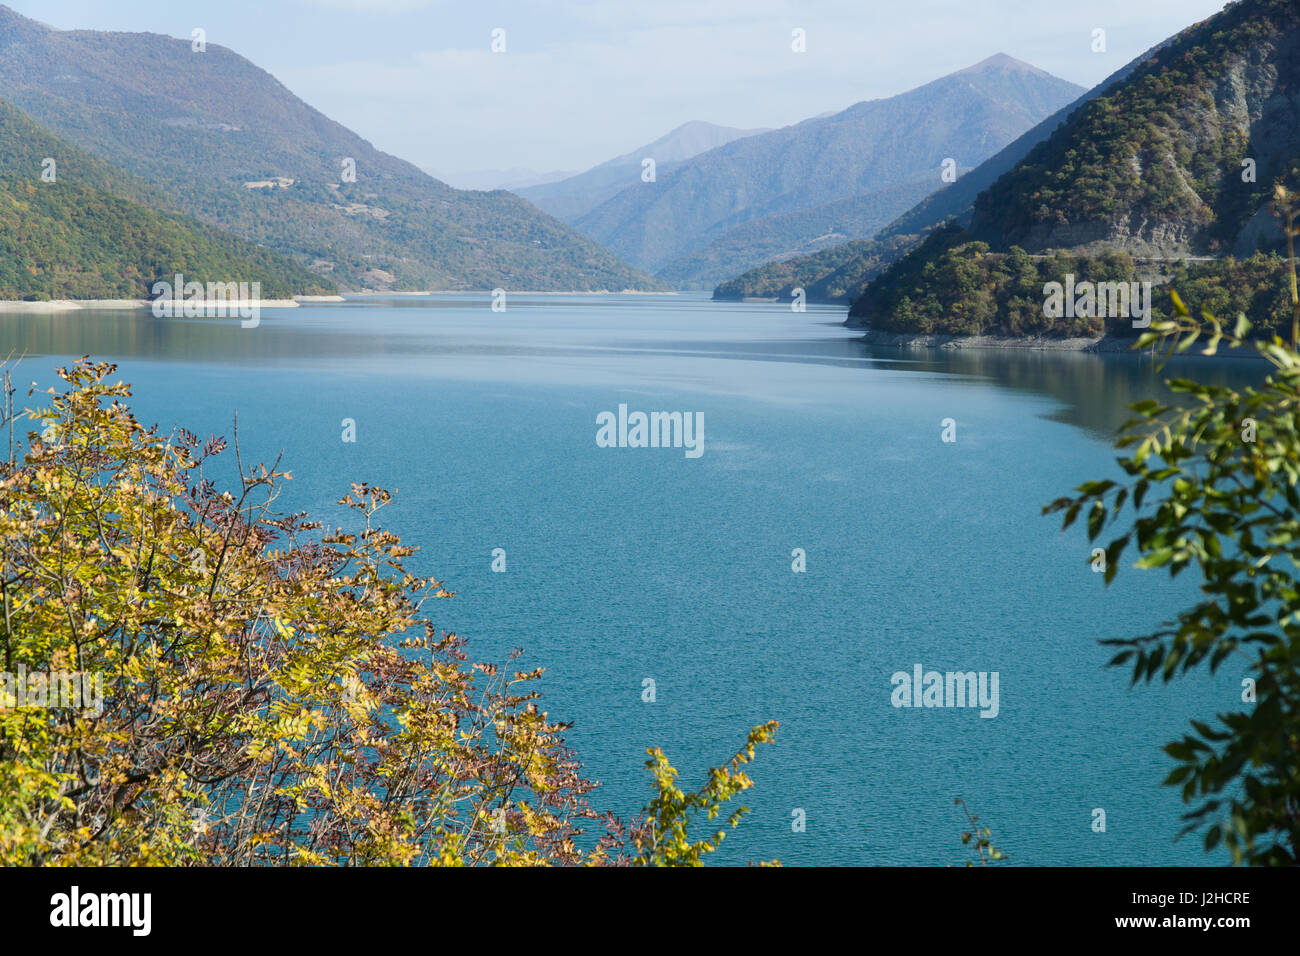 View of the Zhinvali reservoir on the Aragvi river near the village of Ananuri. September Stock Photo